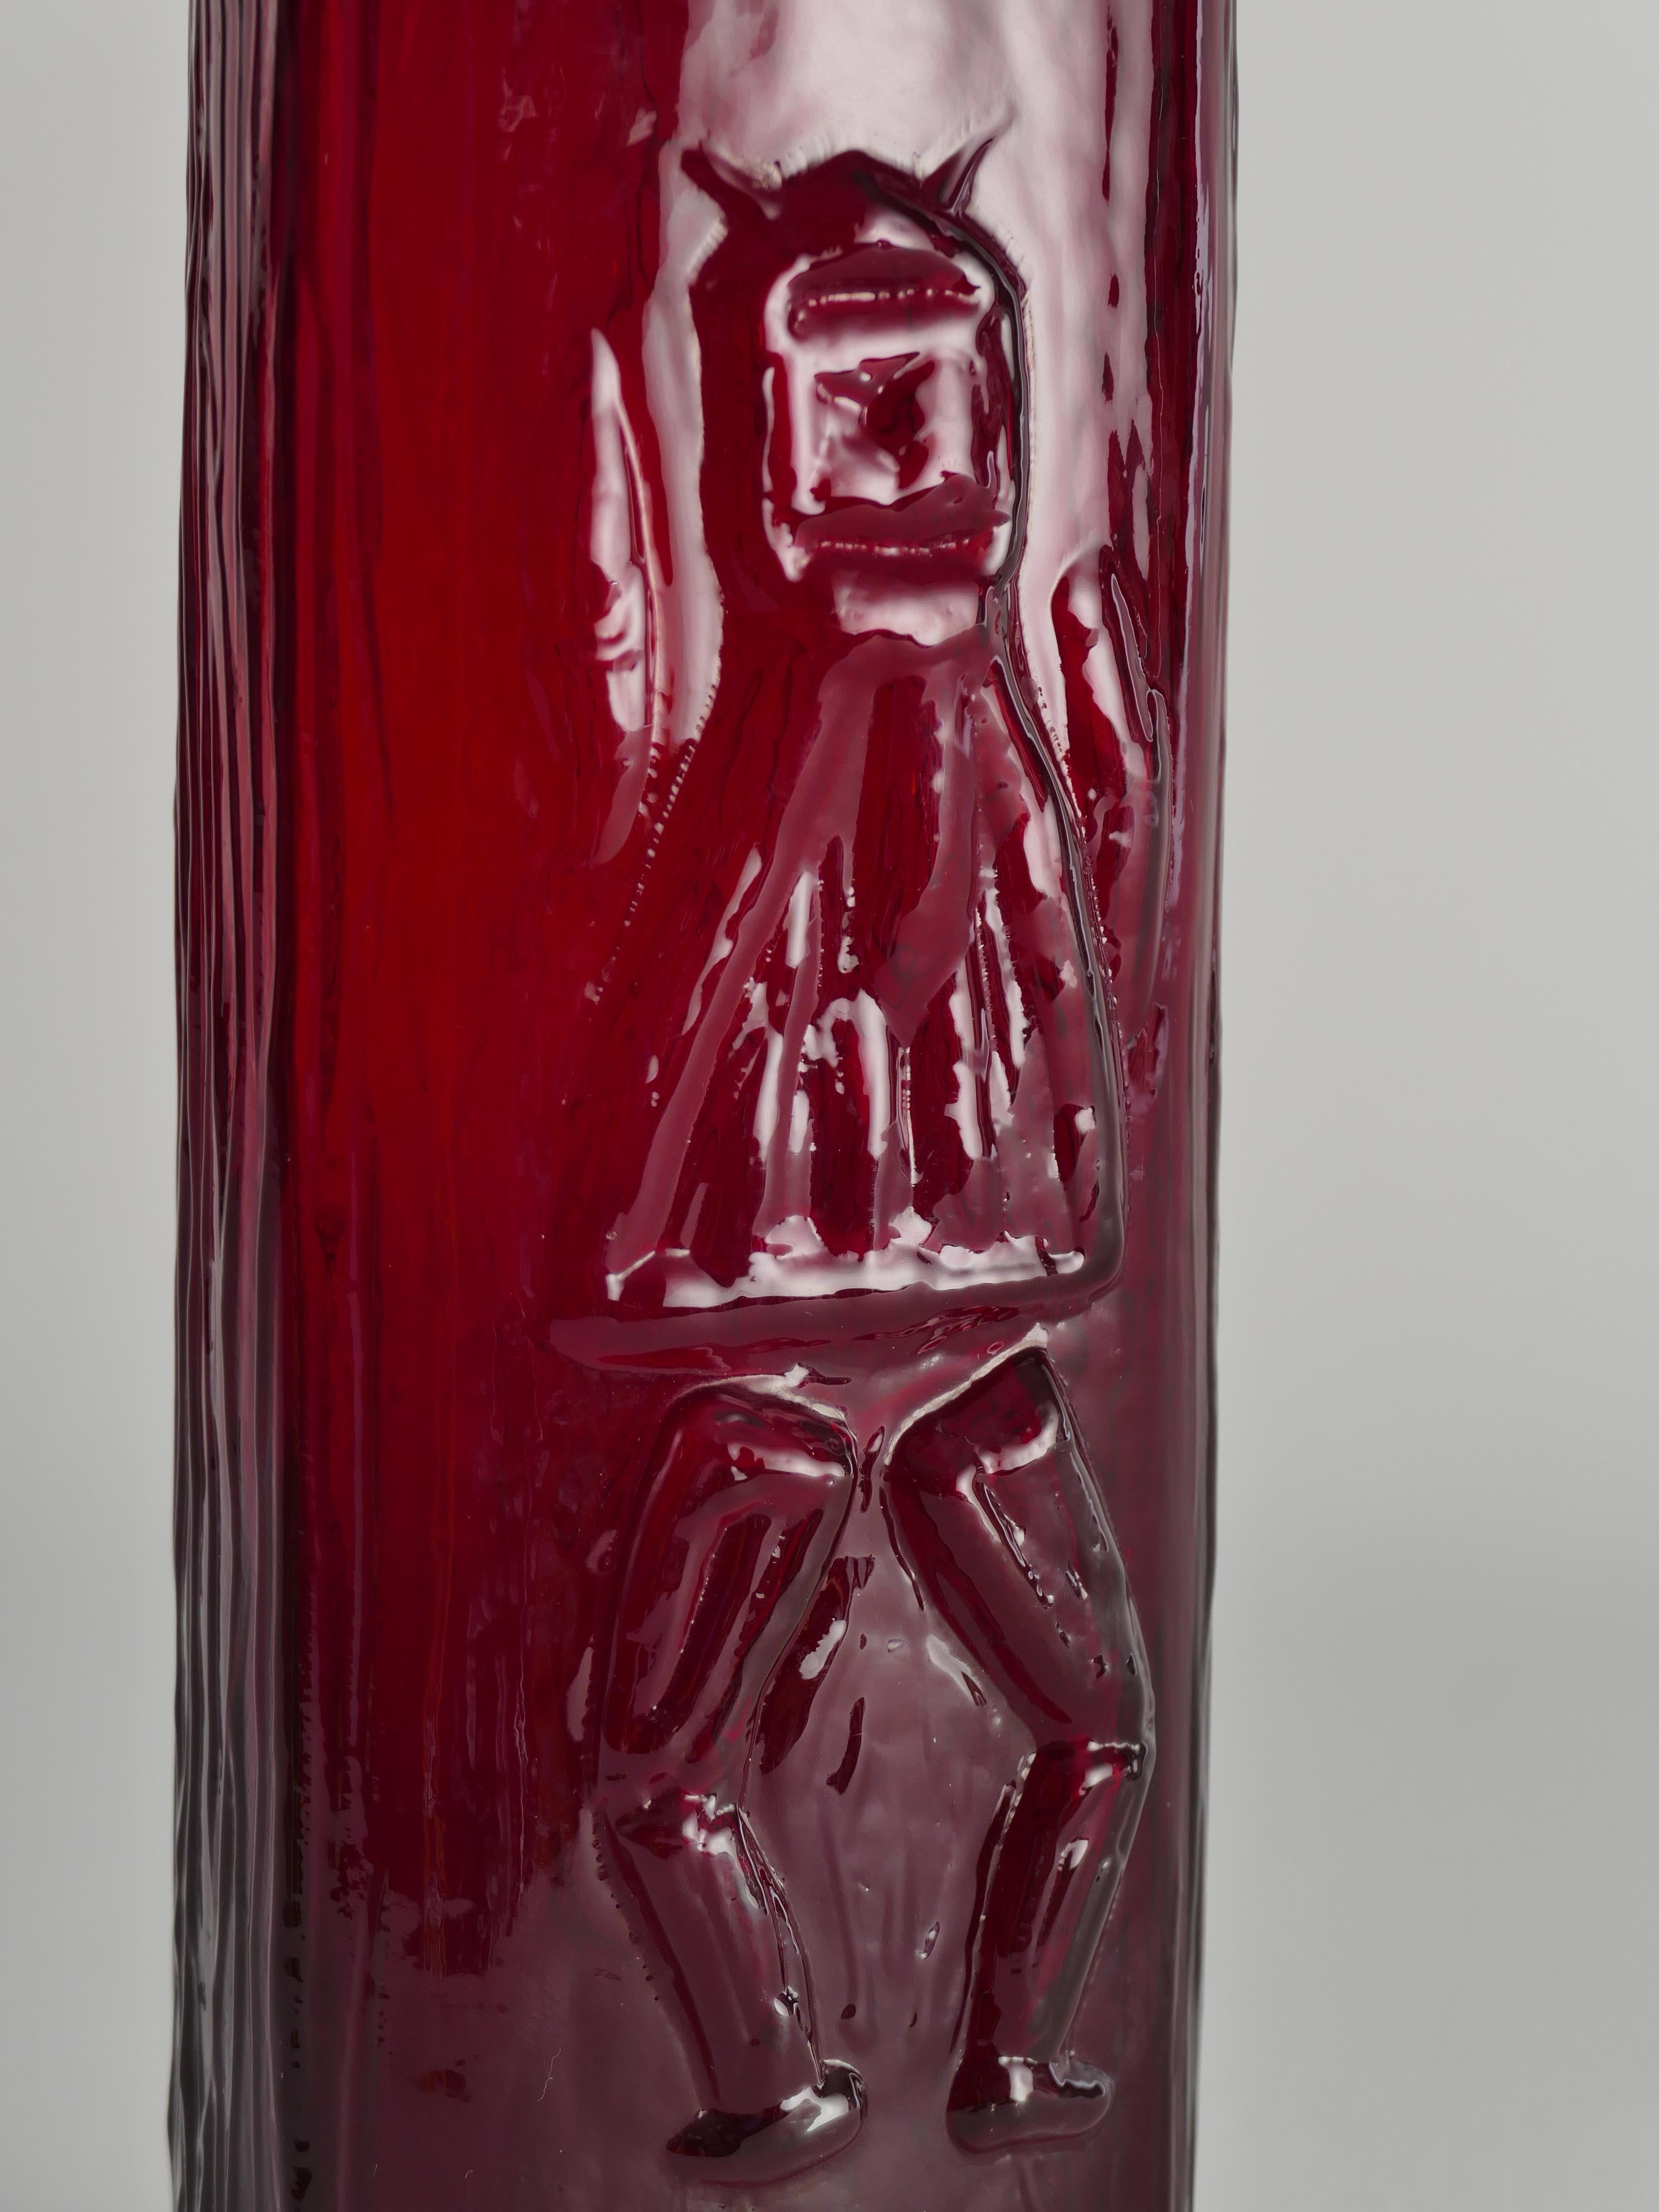 Mold blown scandinavian modern red devil triangular glass vase by Christer Sjögren for Lindshammar 1960s. He developed the special technique of blowing up the piece of glass in a cavity made of brick.  
The captivating red, organically textured